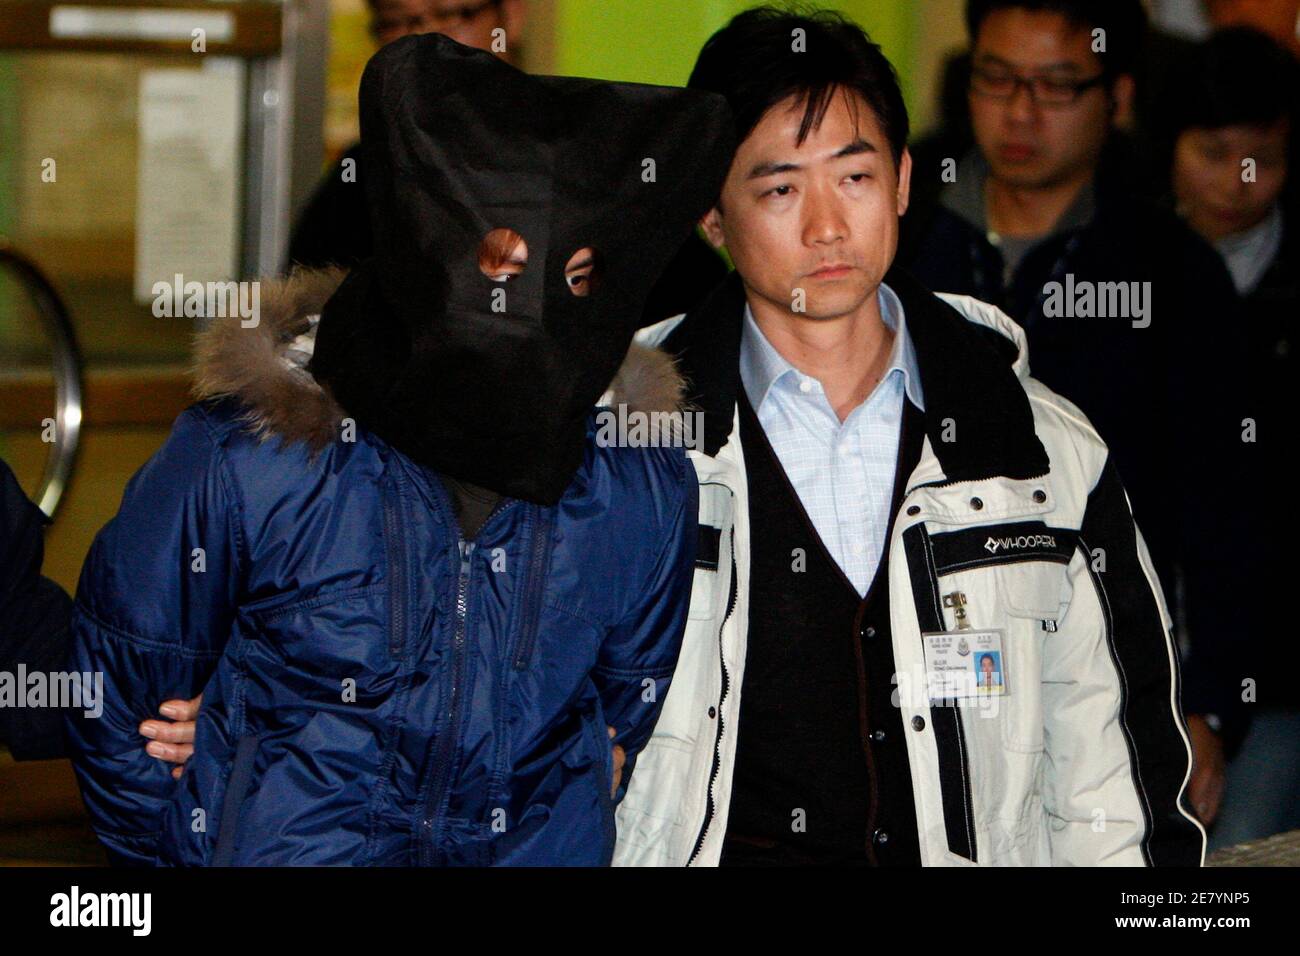 A suspect (L) related to one of the acid attacks is taken away by the police in Hong Kong January 13, 2010. Government radio reported on Wednesday two men have been arrested in connection with an acid attack in Causeway Bay last month, in which six people were injured, with two seriously. Over 100 people have been injured in six of such attacks, spanning several shopping districts in the territory since December 2008.   REUTERS/Tyrone Siu     (CHINA - Tags: CRIME LAW) Stock Photo